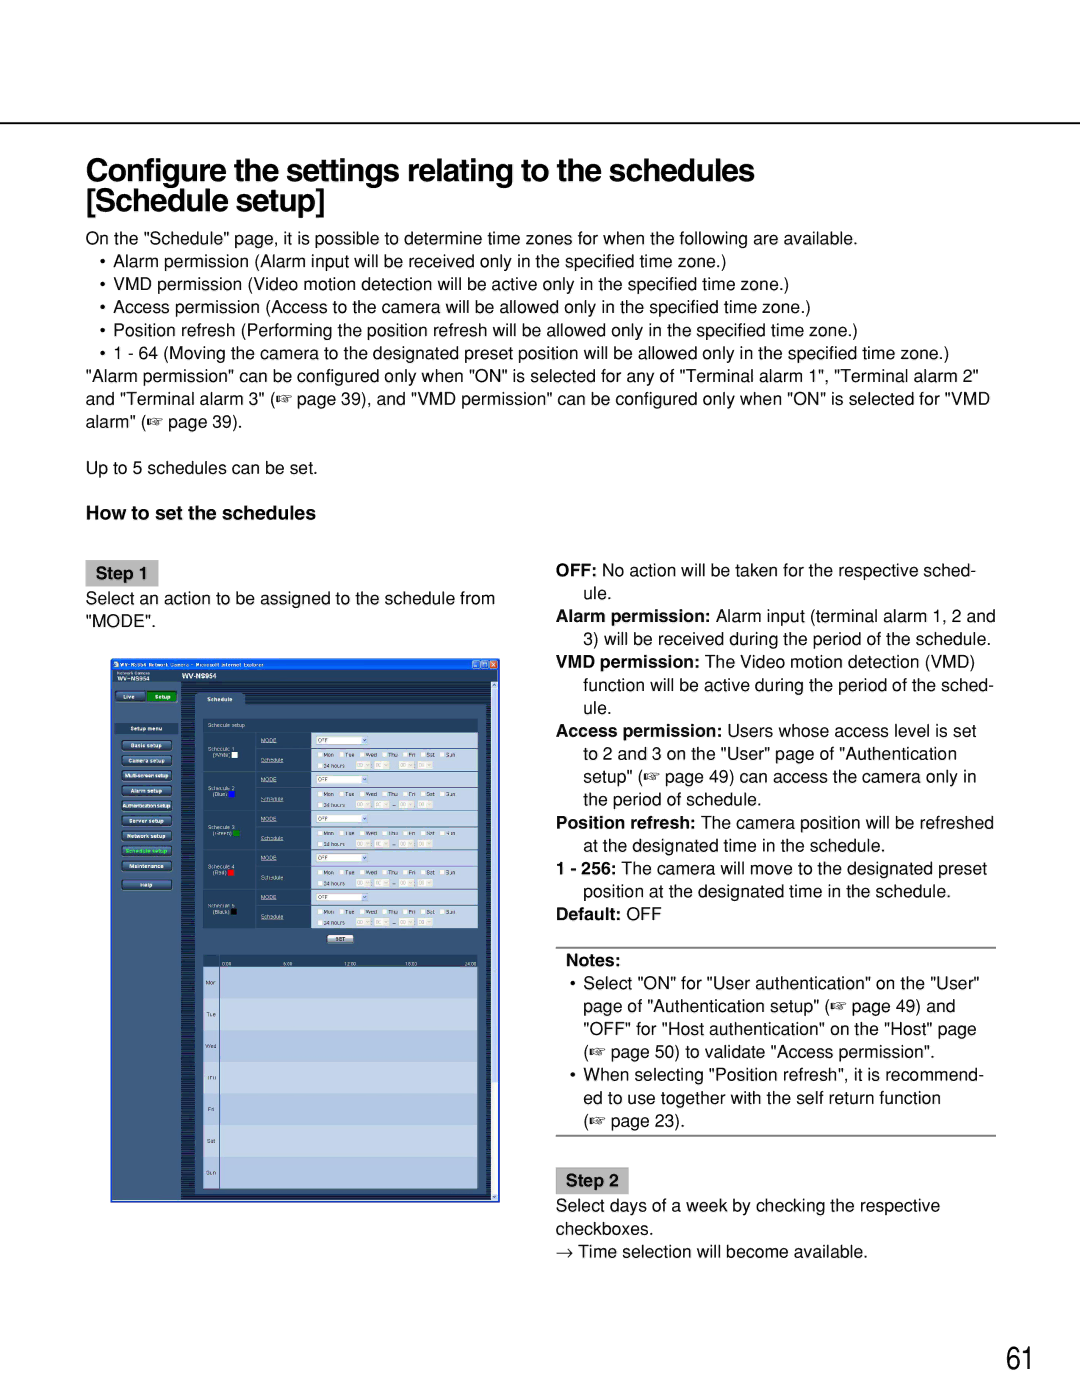 Panasonic WV-NS954, WV-NW964 manual How to set the schedules, Default OFF 